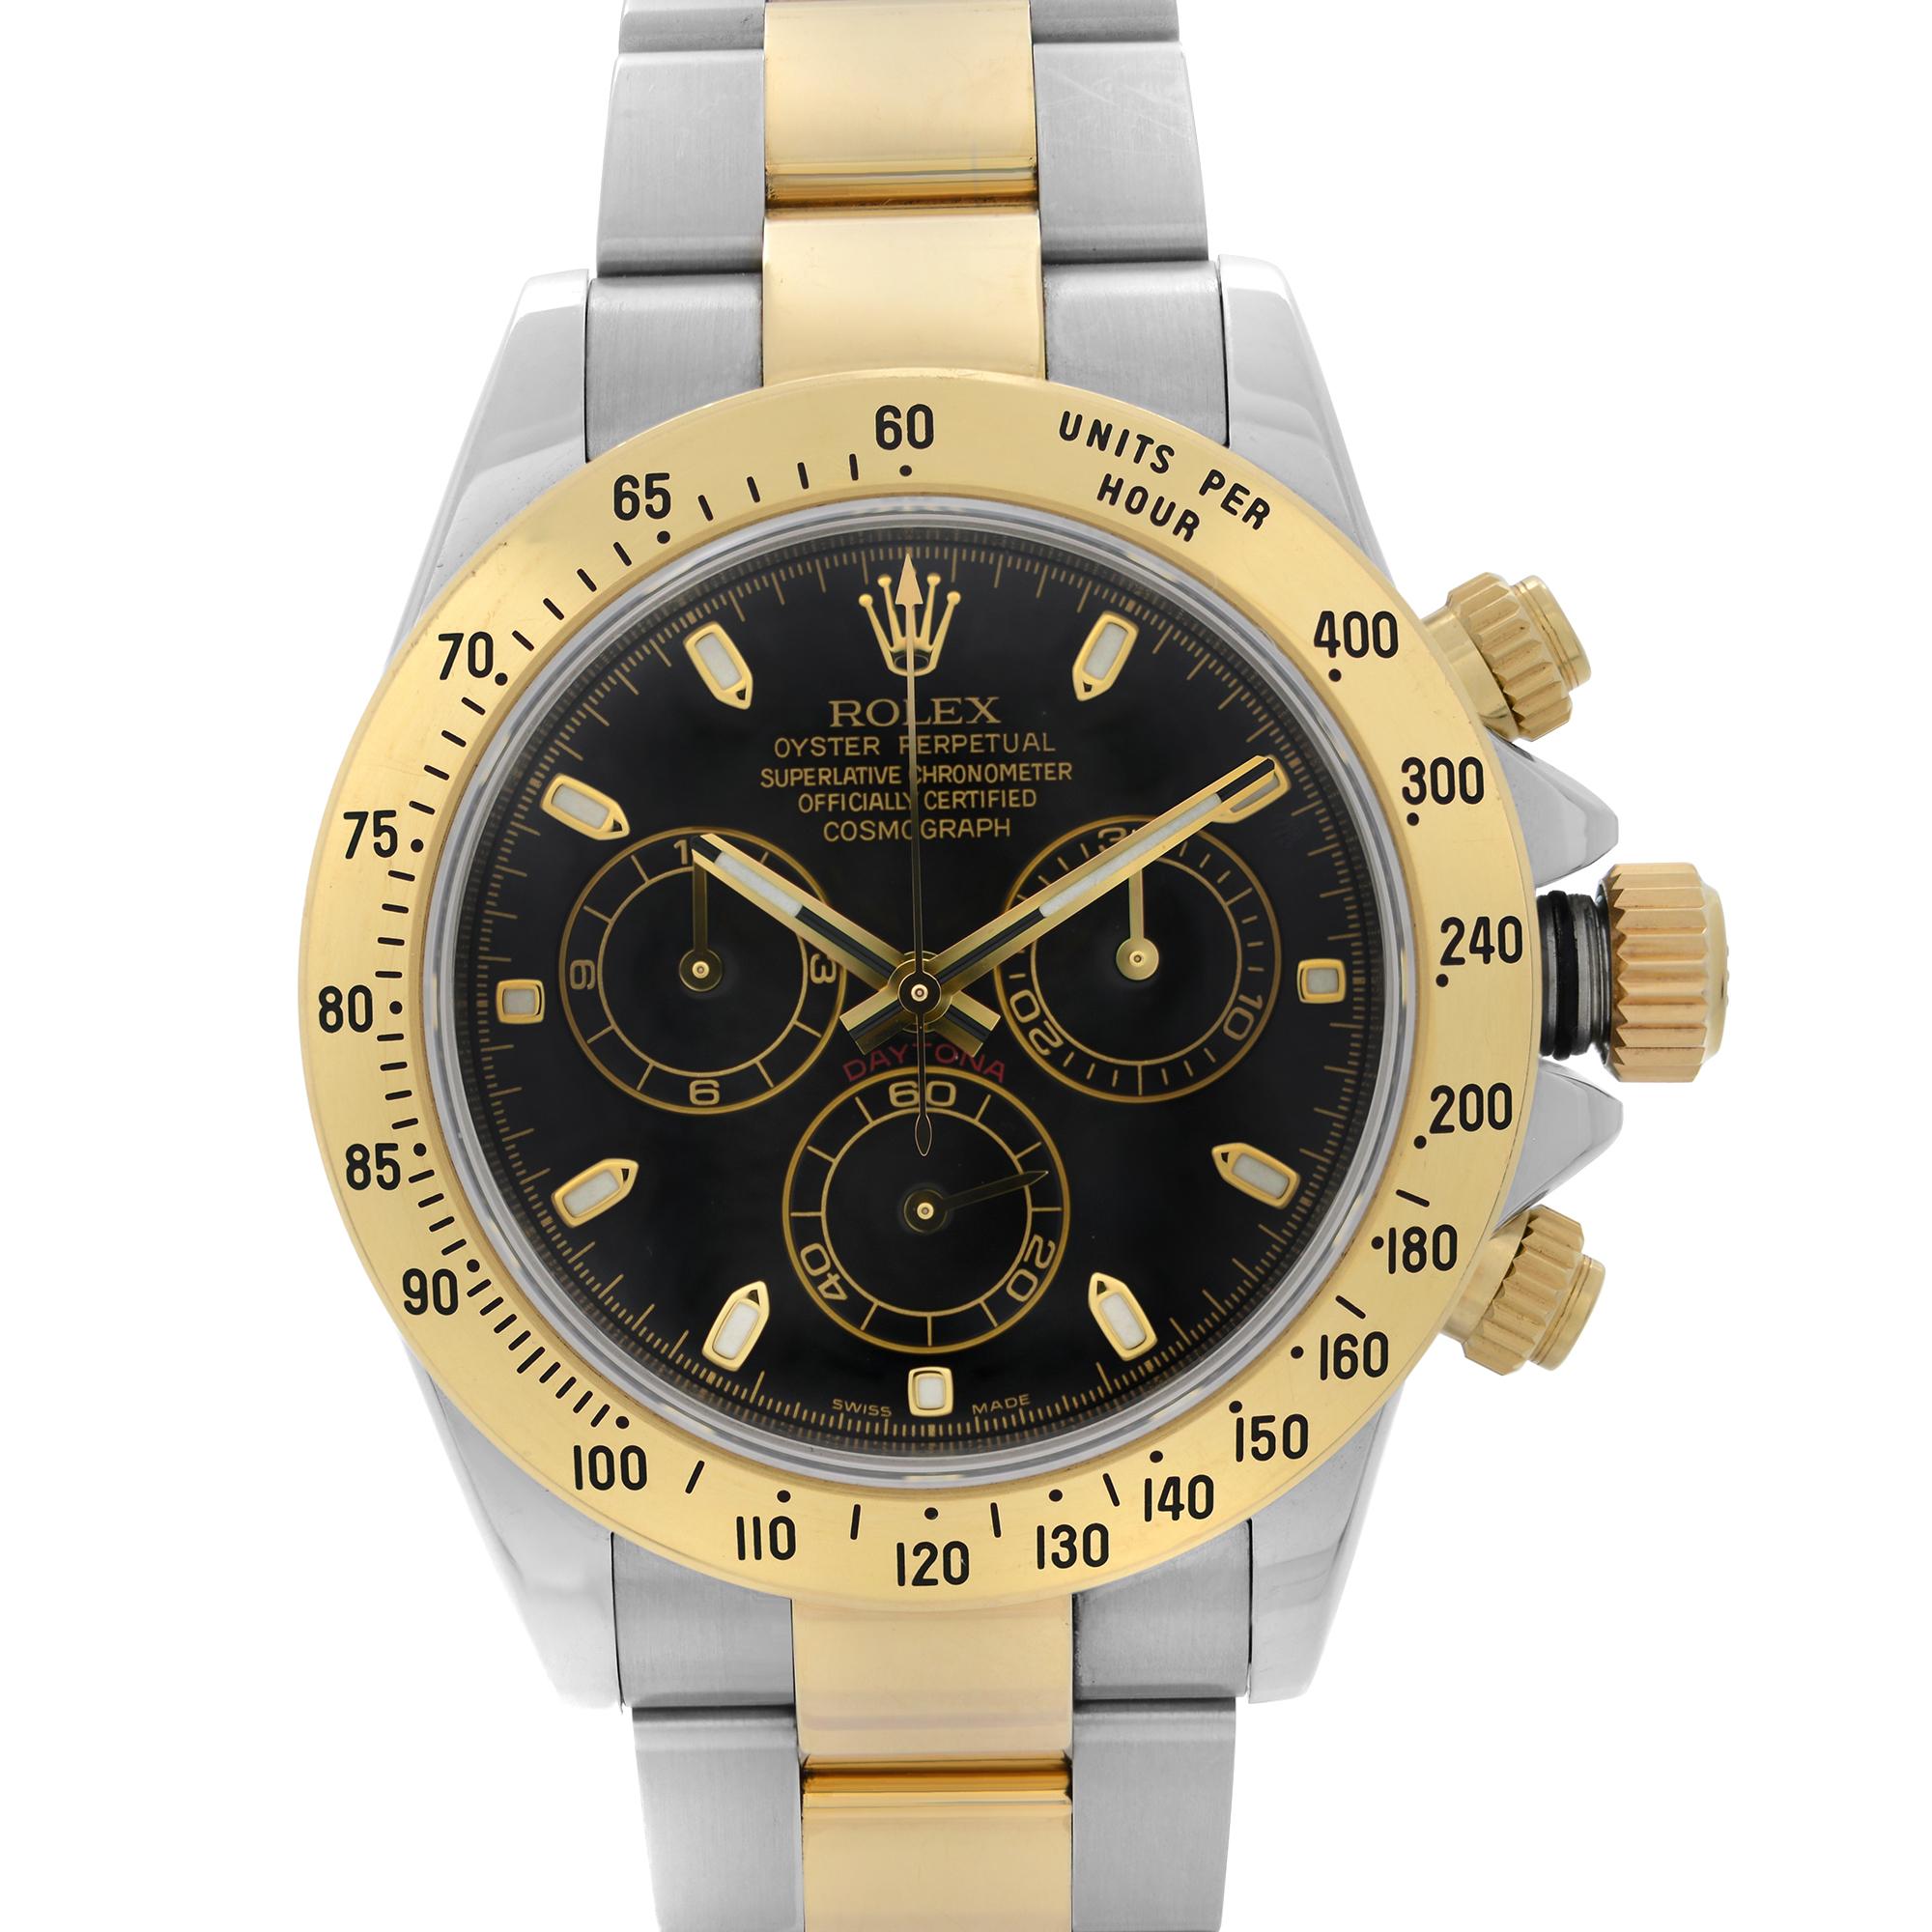 Engraved, V-series. Pre Owned Rolex Daytona 40mm 18K Yellow Gold Steel Black Dial Automatic Mens Watch 116523. This Beautiful Timepiece was produced in 2009 is Powered by Mechanical (Automatic) Movement And Features: Round Stainless Steel Case with